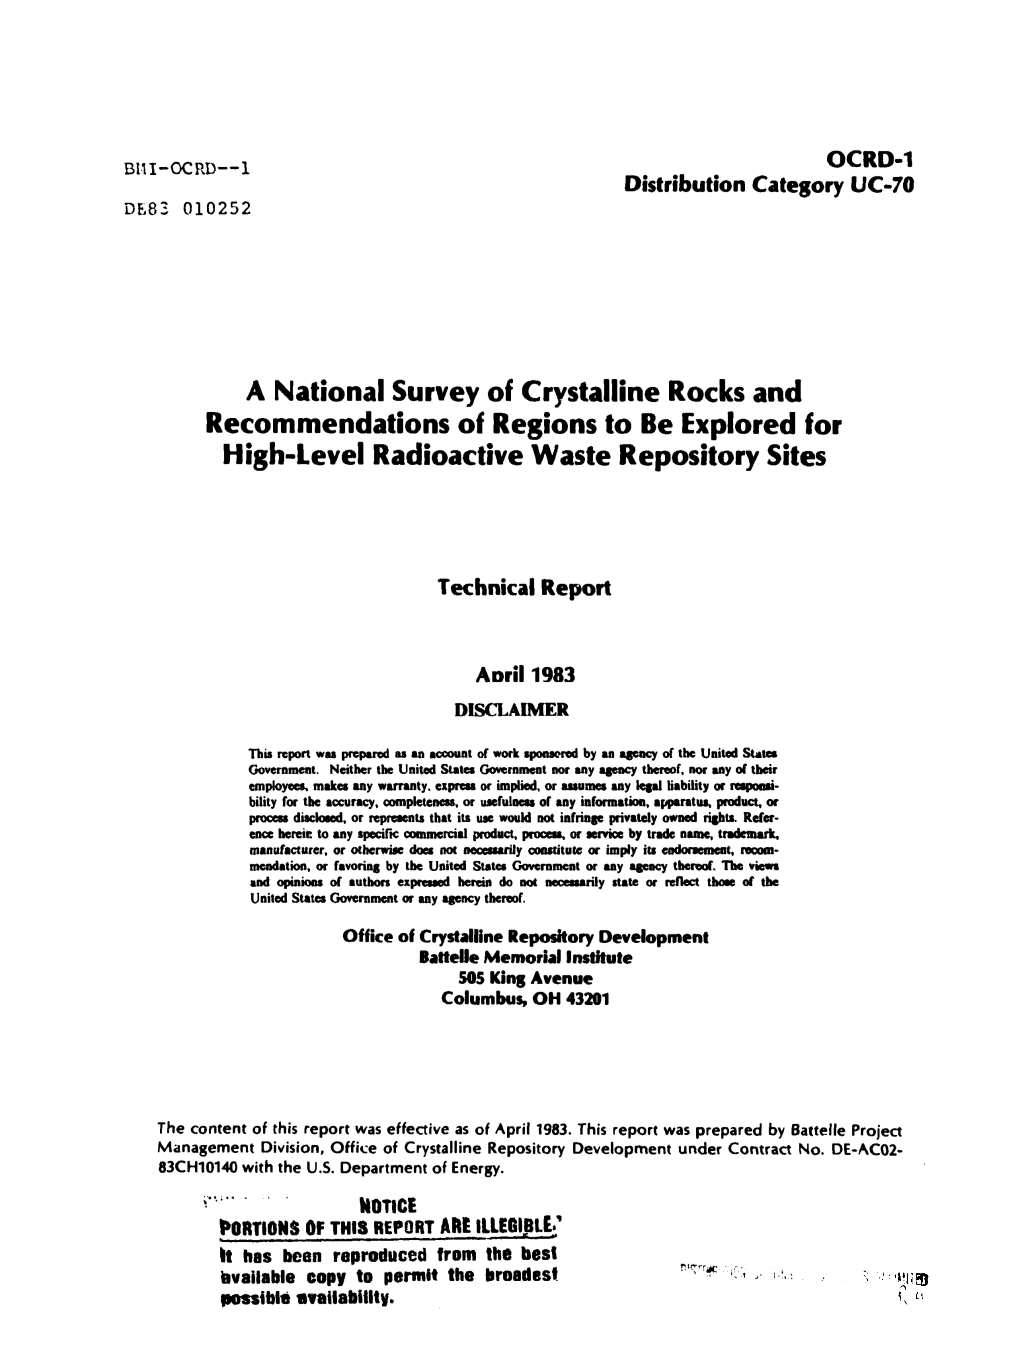 A National Survey of Crystalline Rocks and Recommendations of Regions to Be Explored for High-Level Radioactive Waste Repository Sites